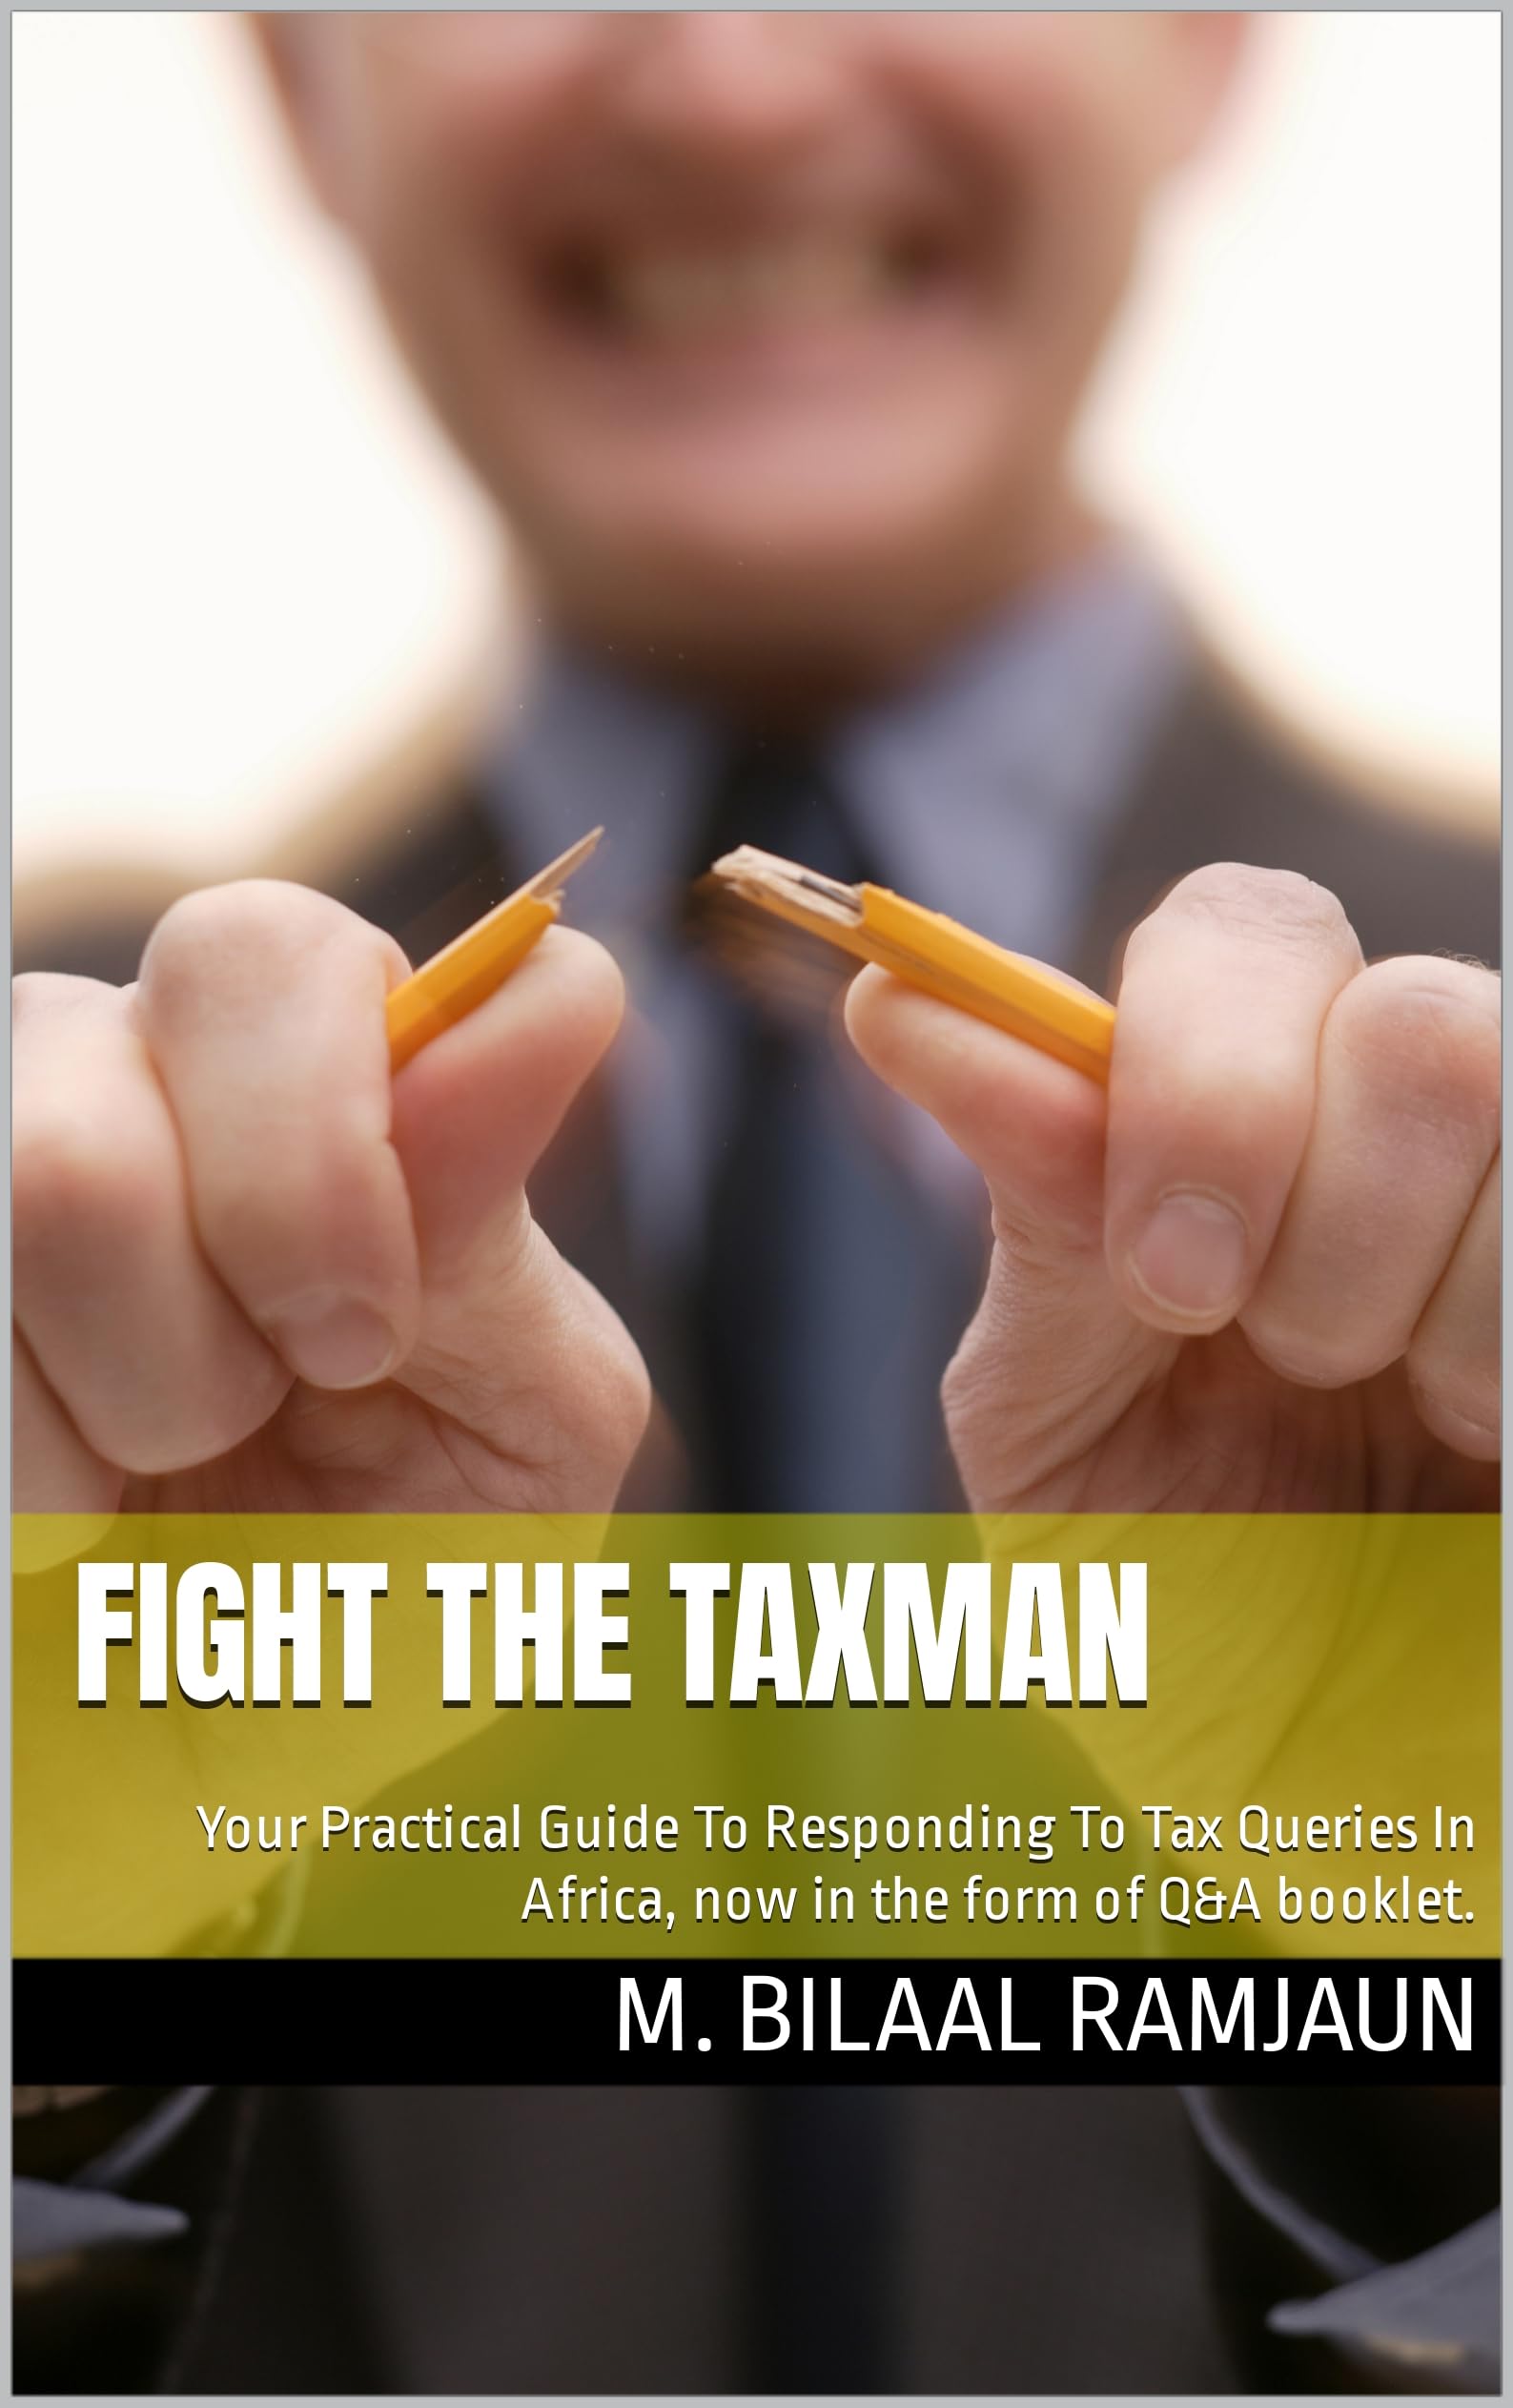 Fight the Taxman: Your Practical Guide To Responding To Tax Queries In Africa, now in the form of Q&A booklet.